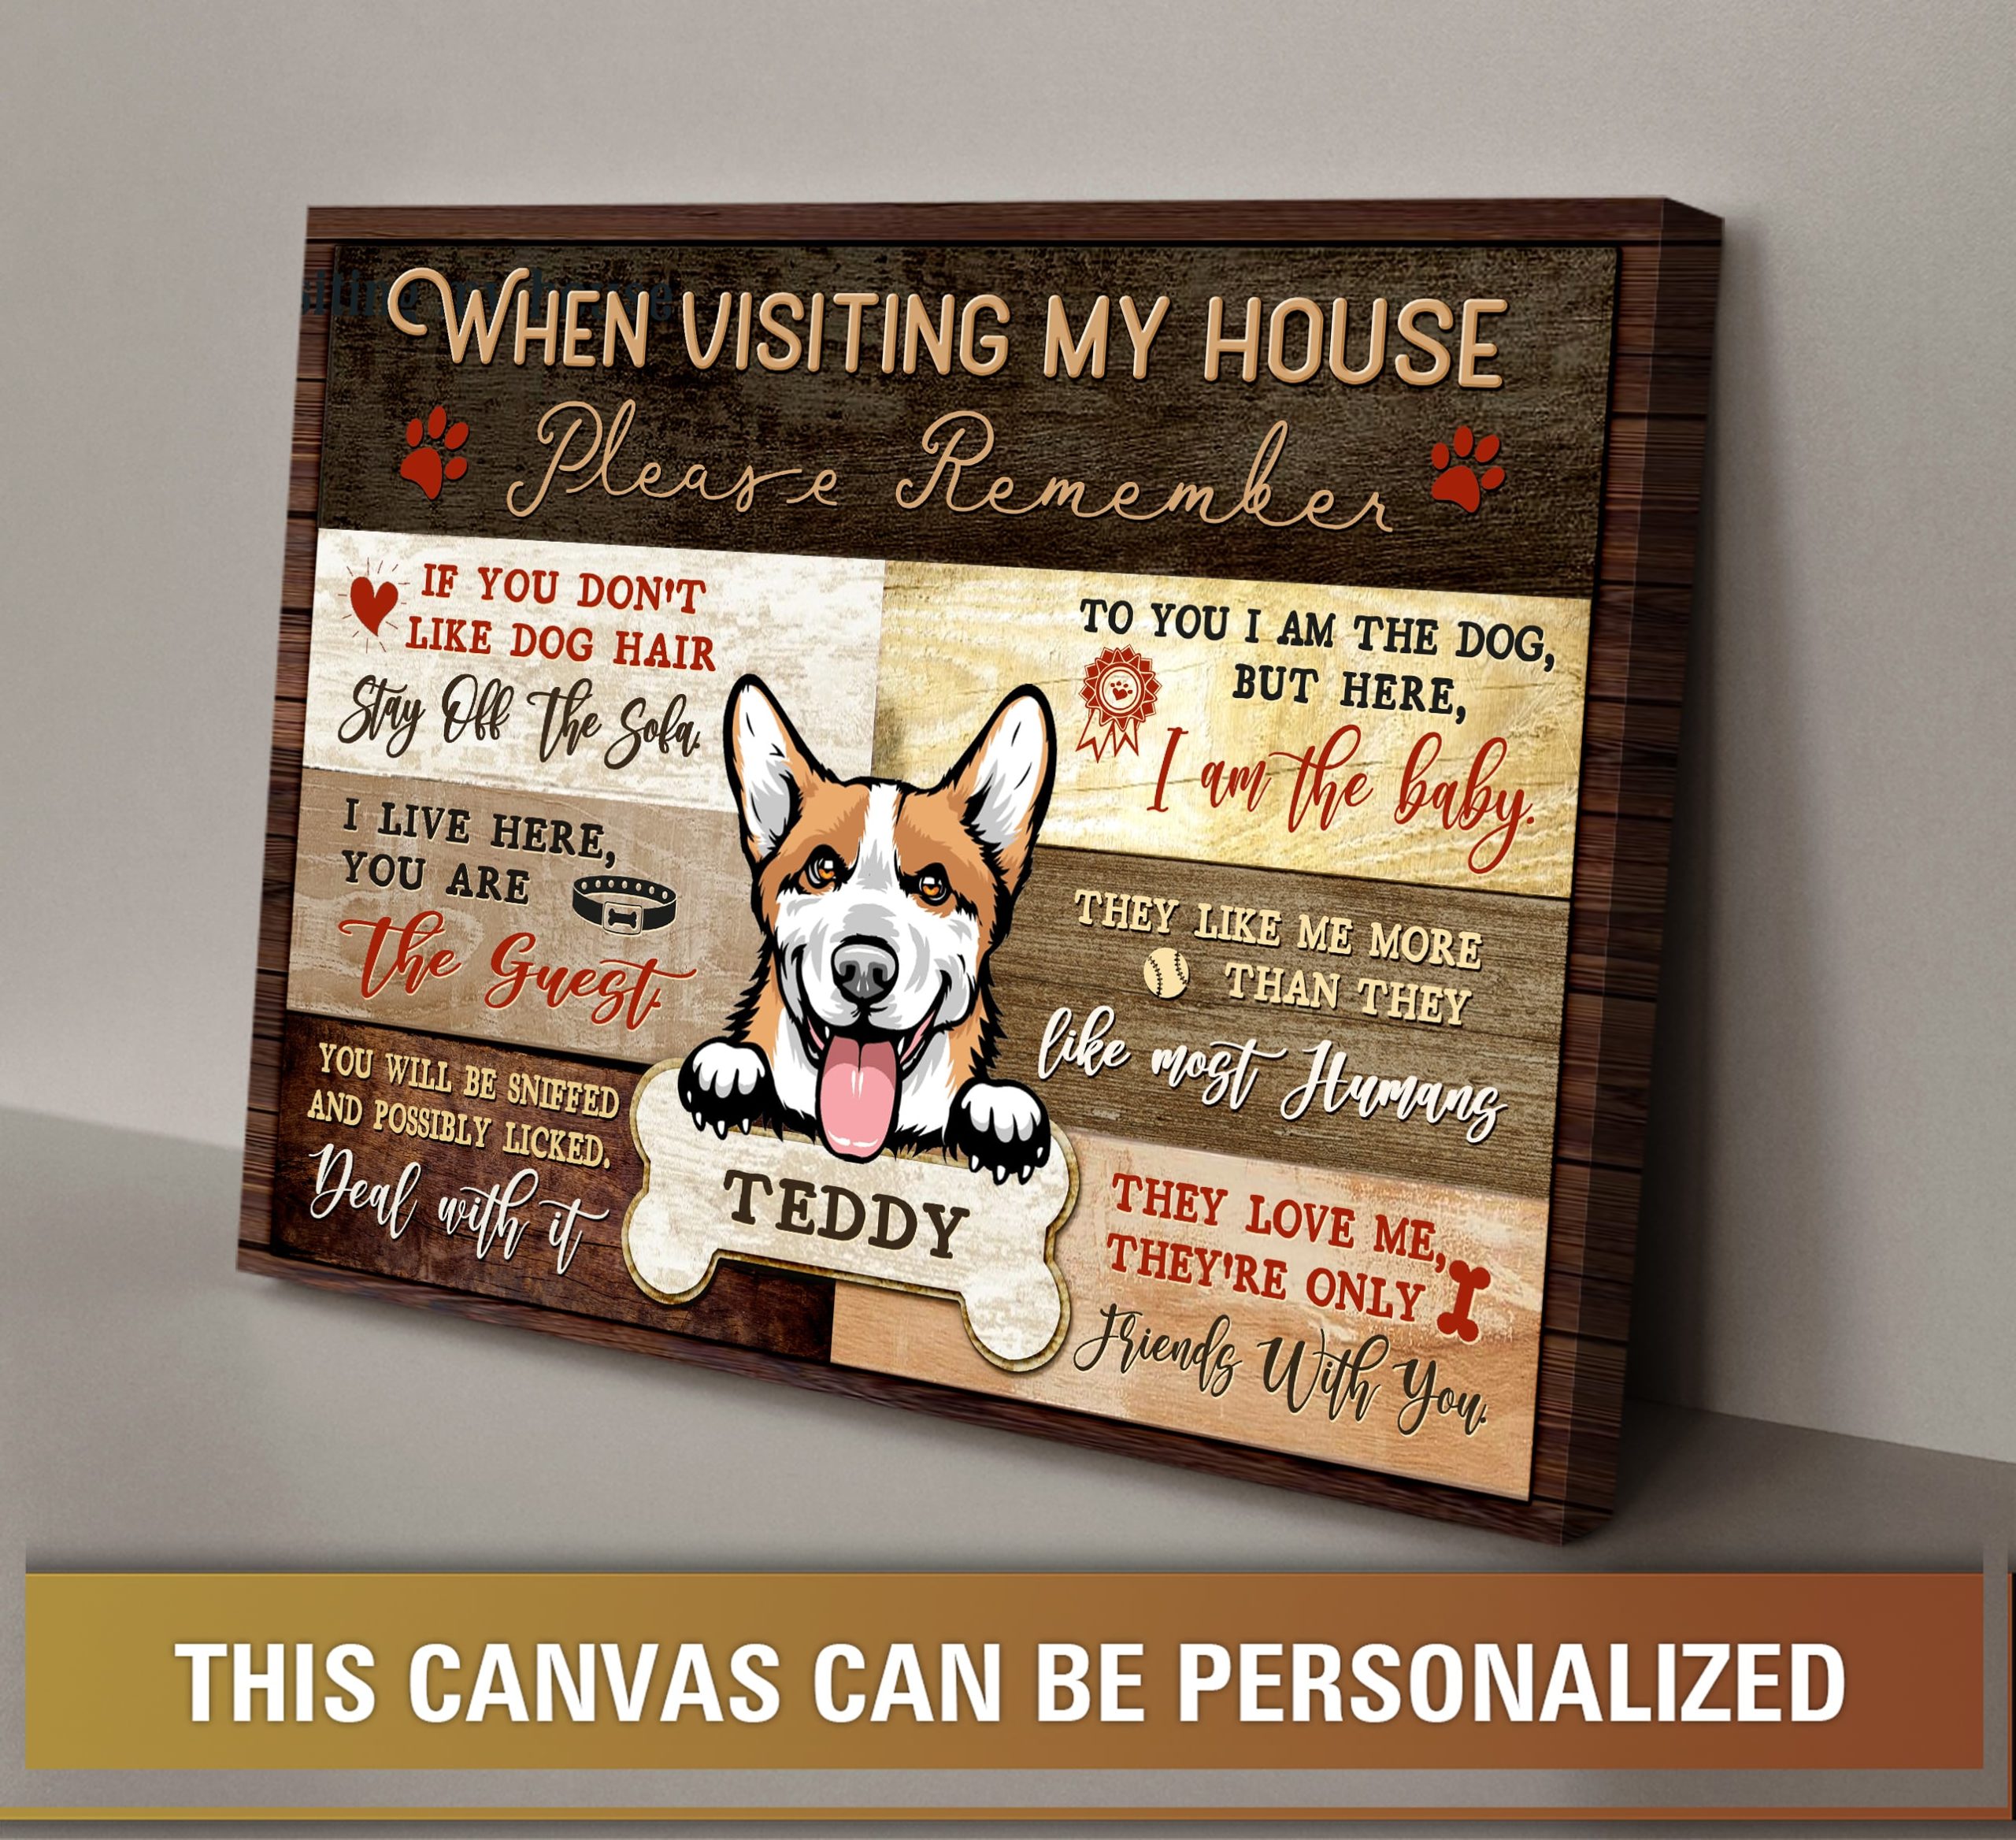 https://images.ohcanvas.com/ohcanvas_com/2022/08/12022437/funny-pet-portrait-canvas-custom-dog-gifts-for-owners-when-visiting-my-house01-scaled.jpg